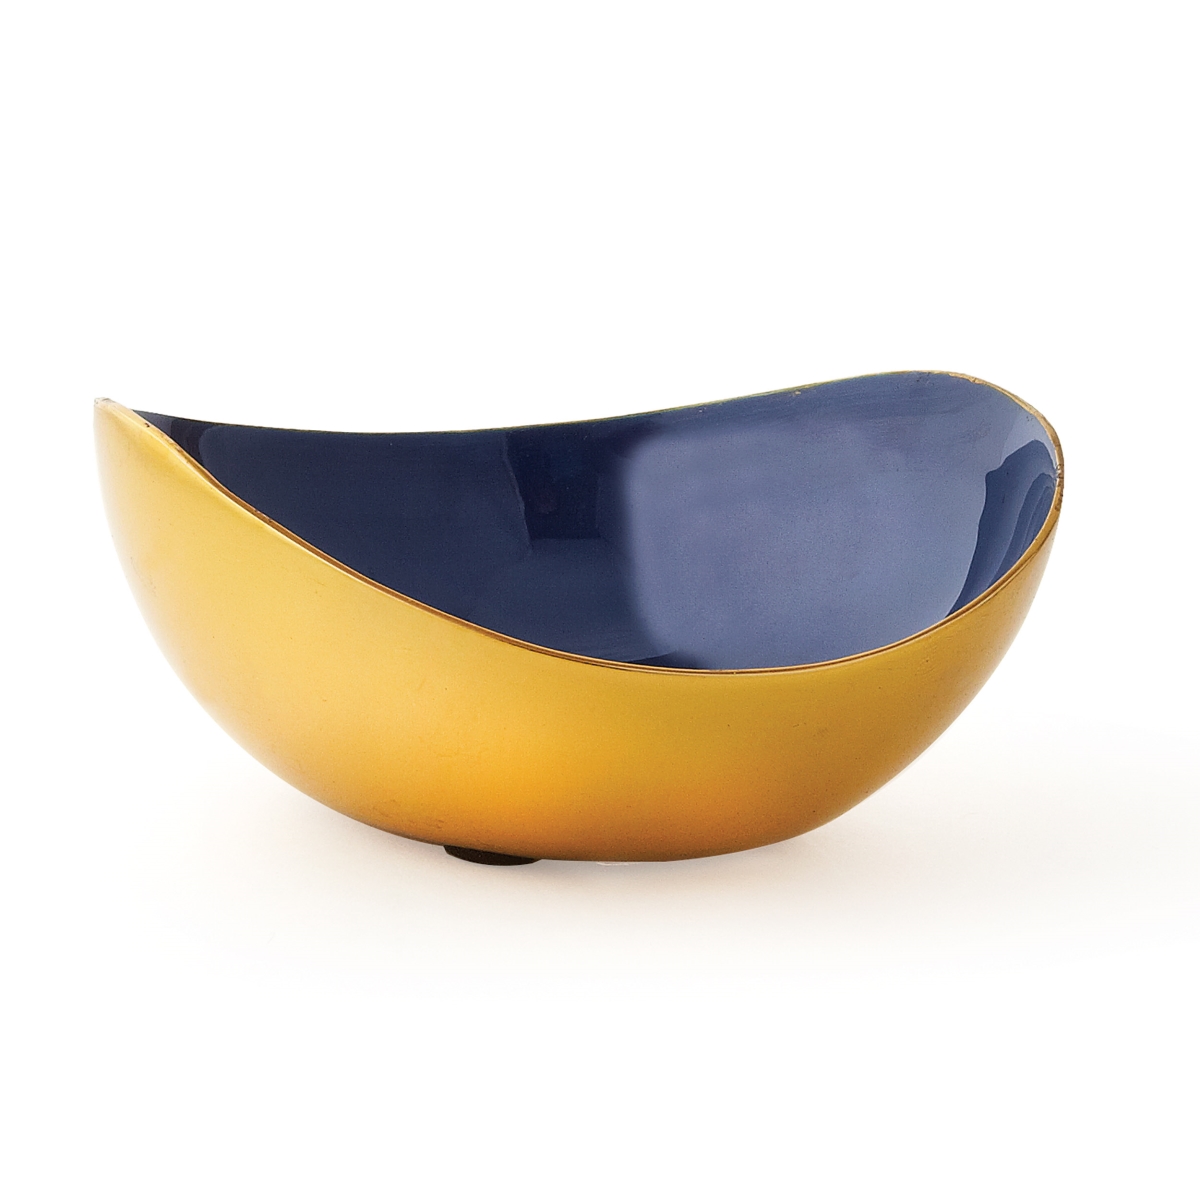 70171 4.25 X 4 X 2.25 In. Crescent Bowl, Gold & Navy